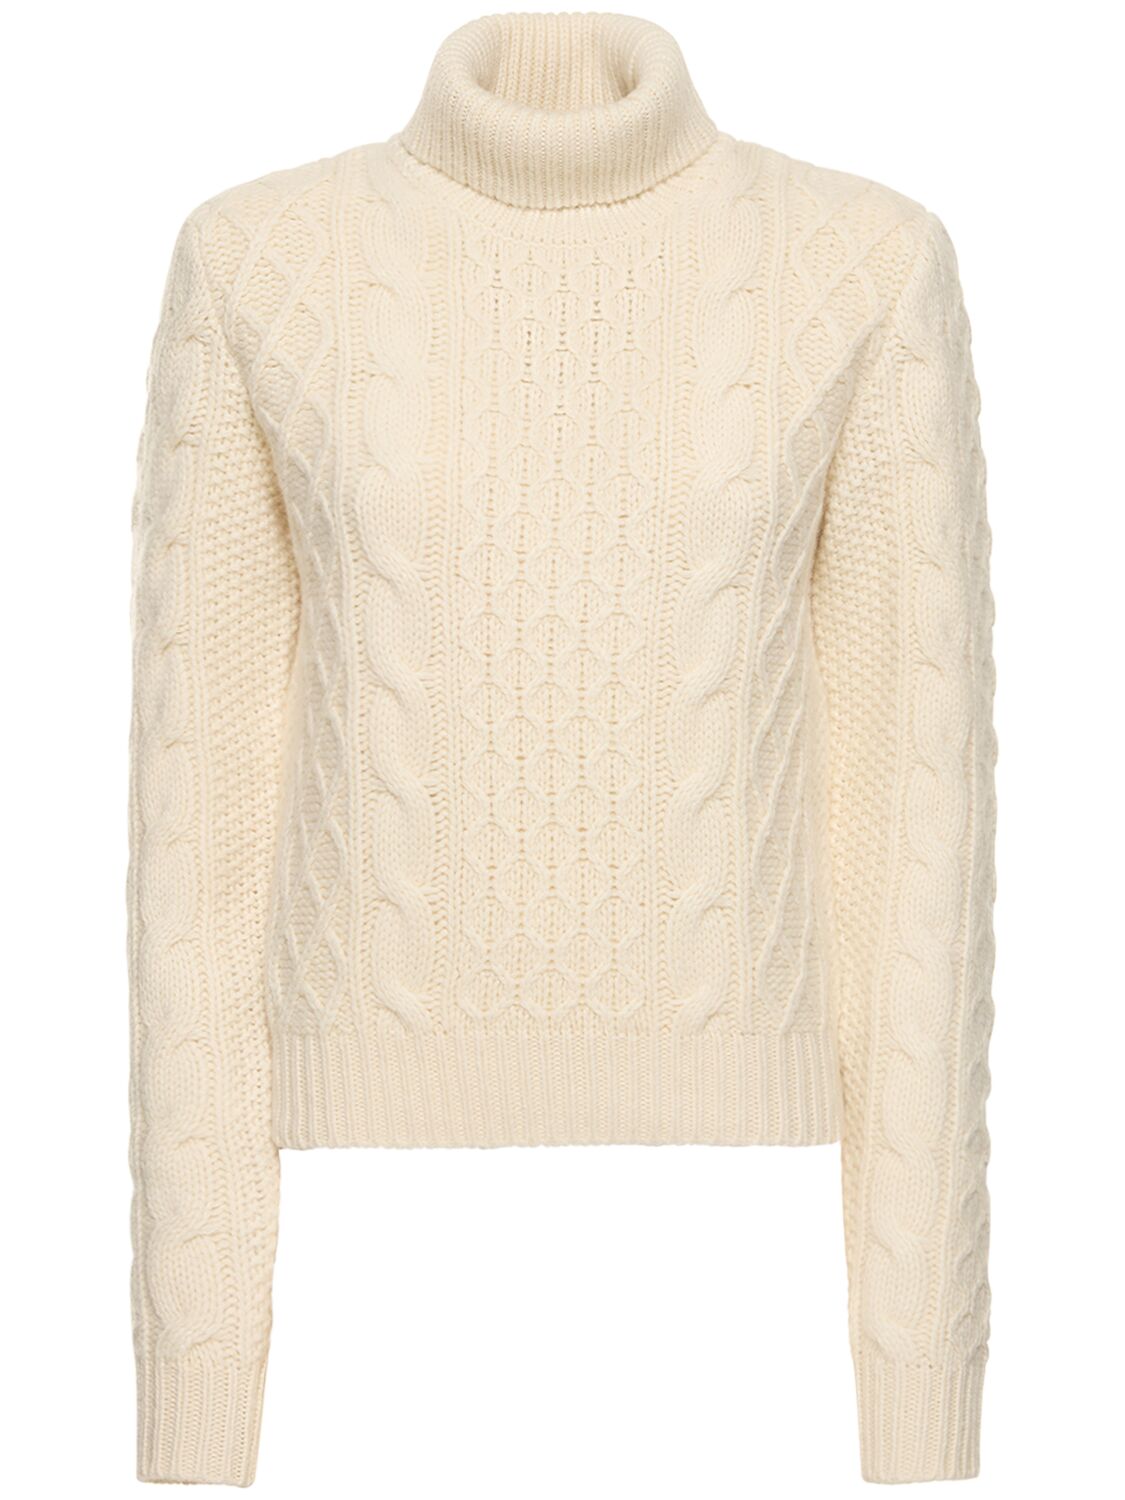 Image of Andrina Cashmere & Wool Sweater